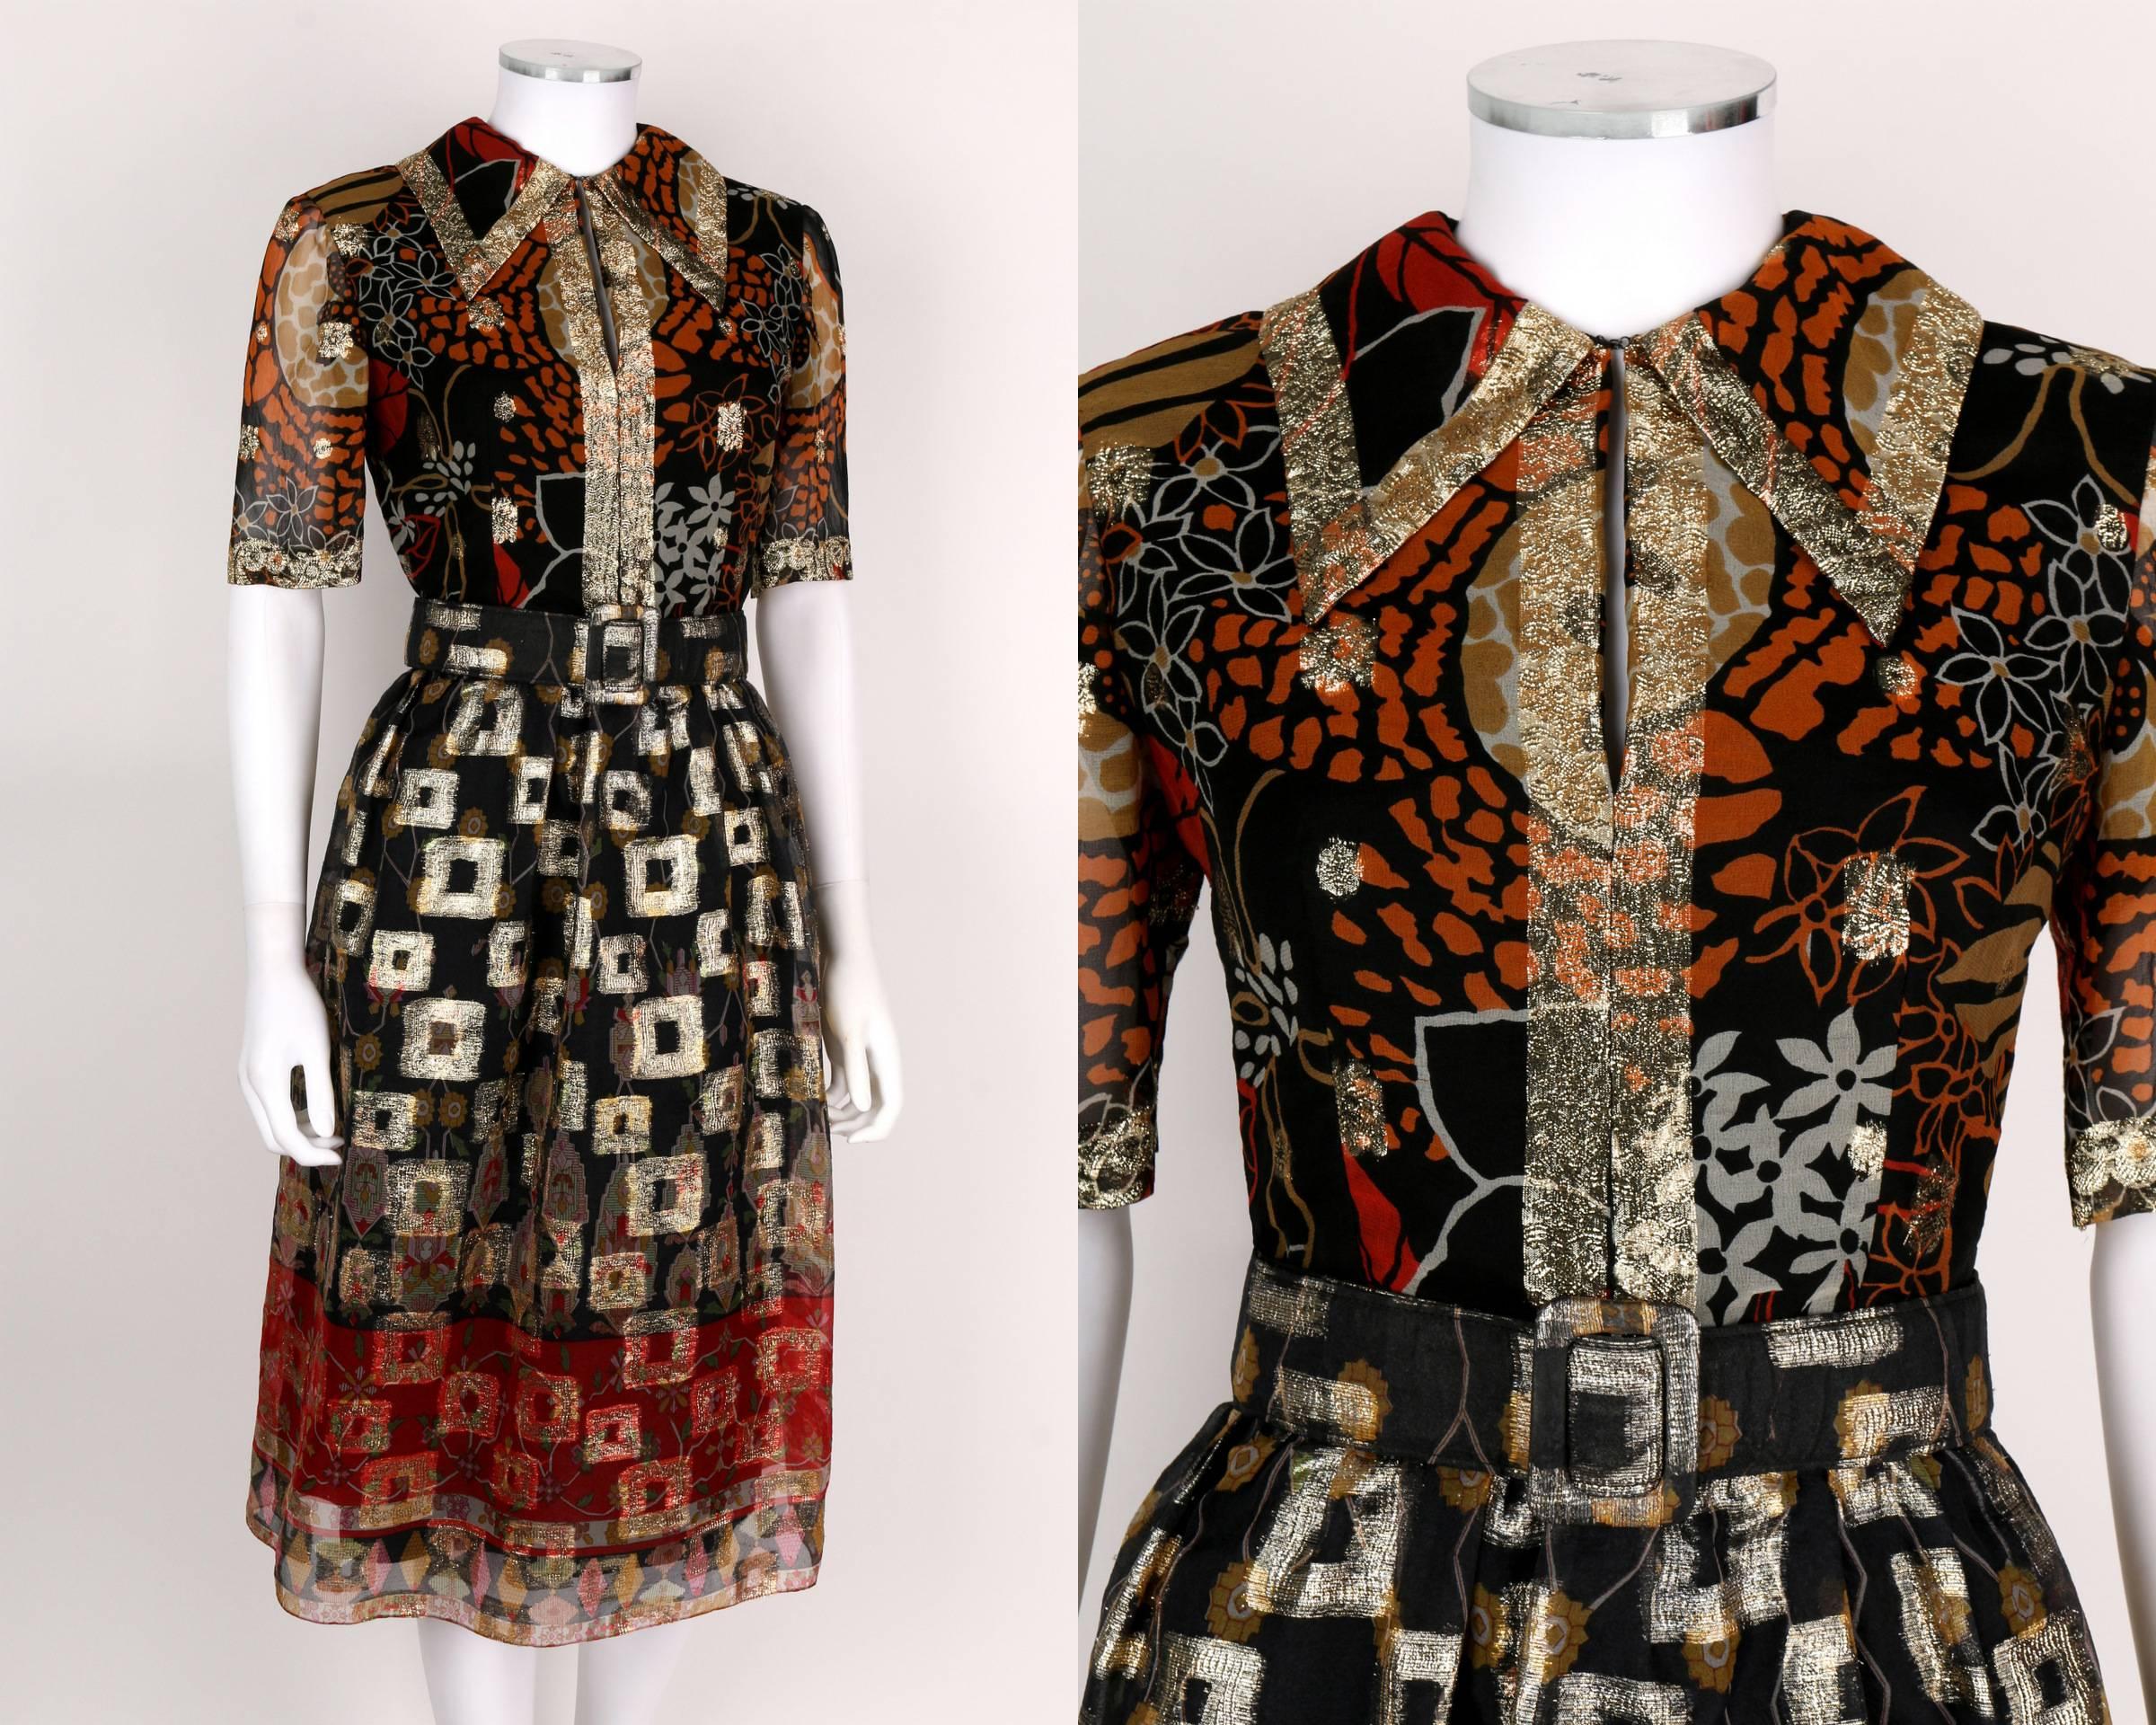 Vintage 1960's Oscar de la Renta Boutique multi-color metallic silk brocade dress. Pointed collar with center front hook and eye closure. Short sleeves. Gold-tone metallic silk floral brocade at collar, cuffs, center front, throughout bodice and in